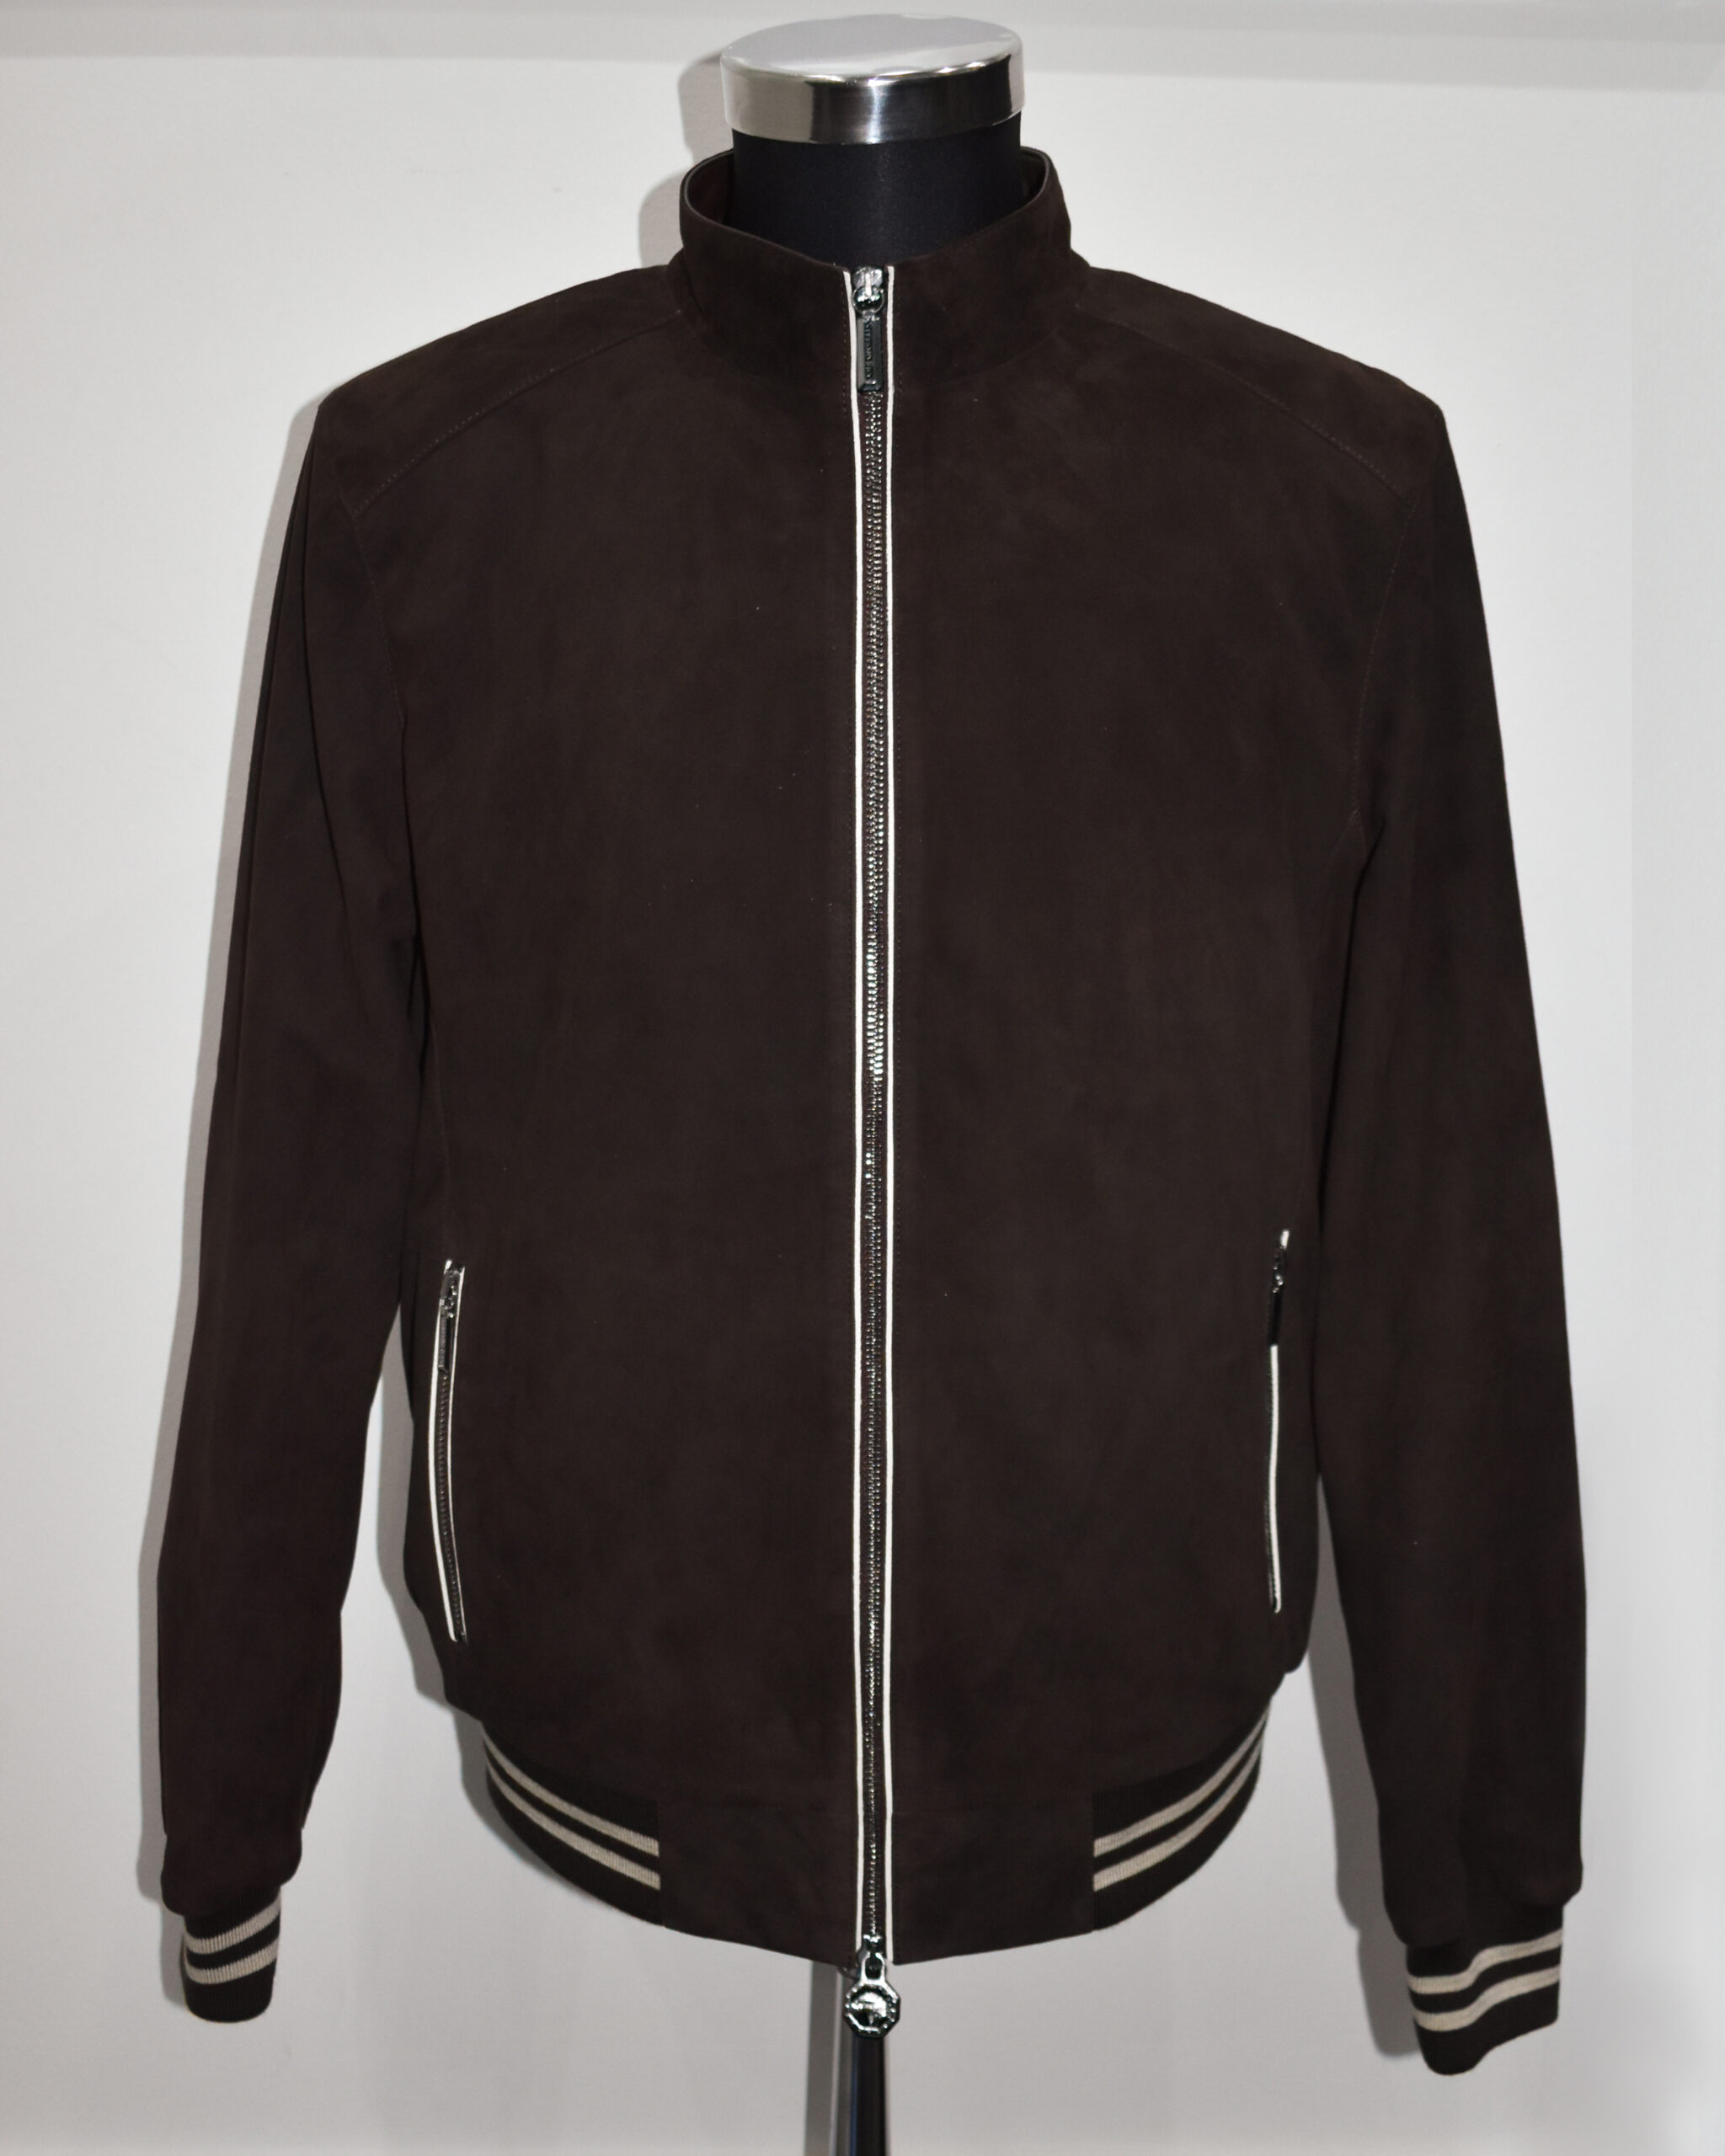 SR Brown Bomber Suede Jacket - Leather Guys